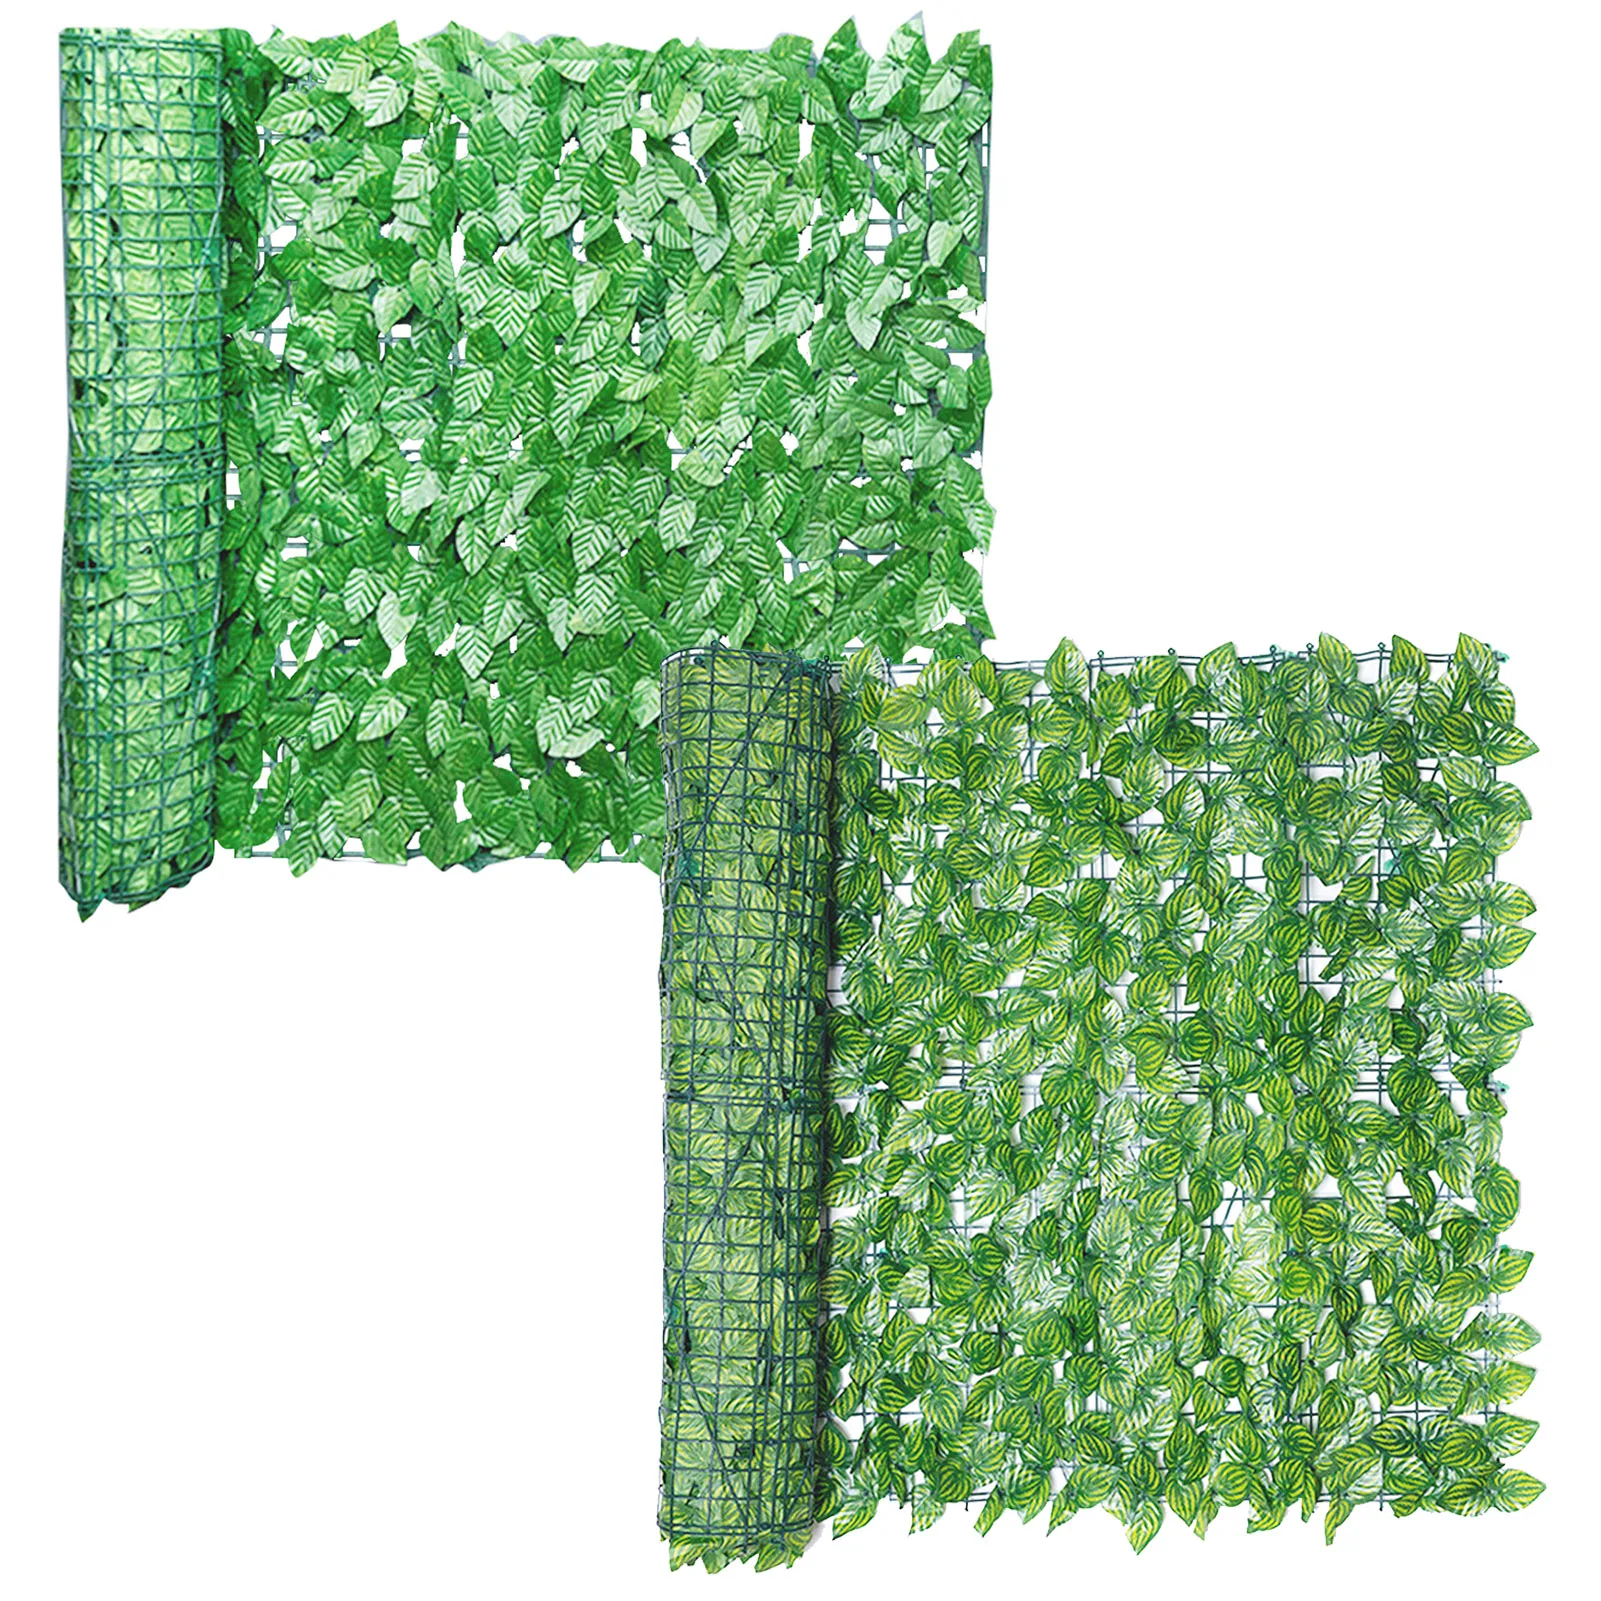 

Artificial Leaf Screening Roll UV Fade Protected Privacy Hedging Wall Landscaping Garden Fence Balcony Screen